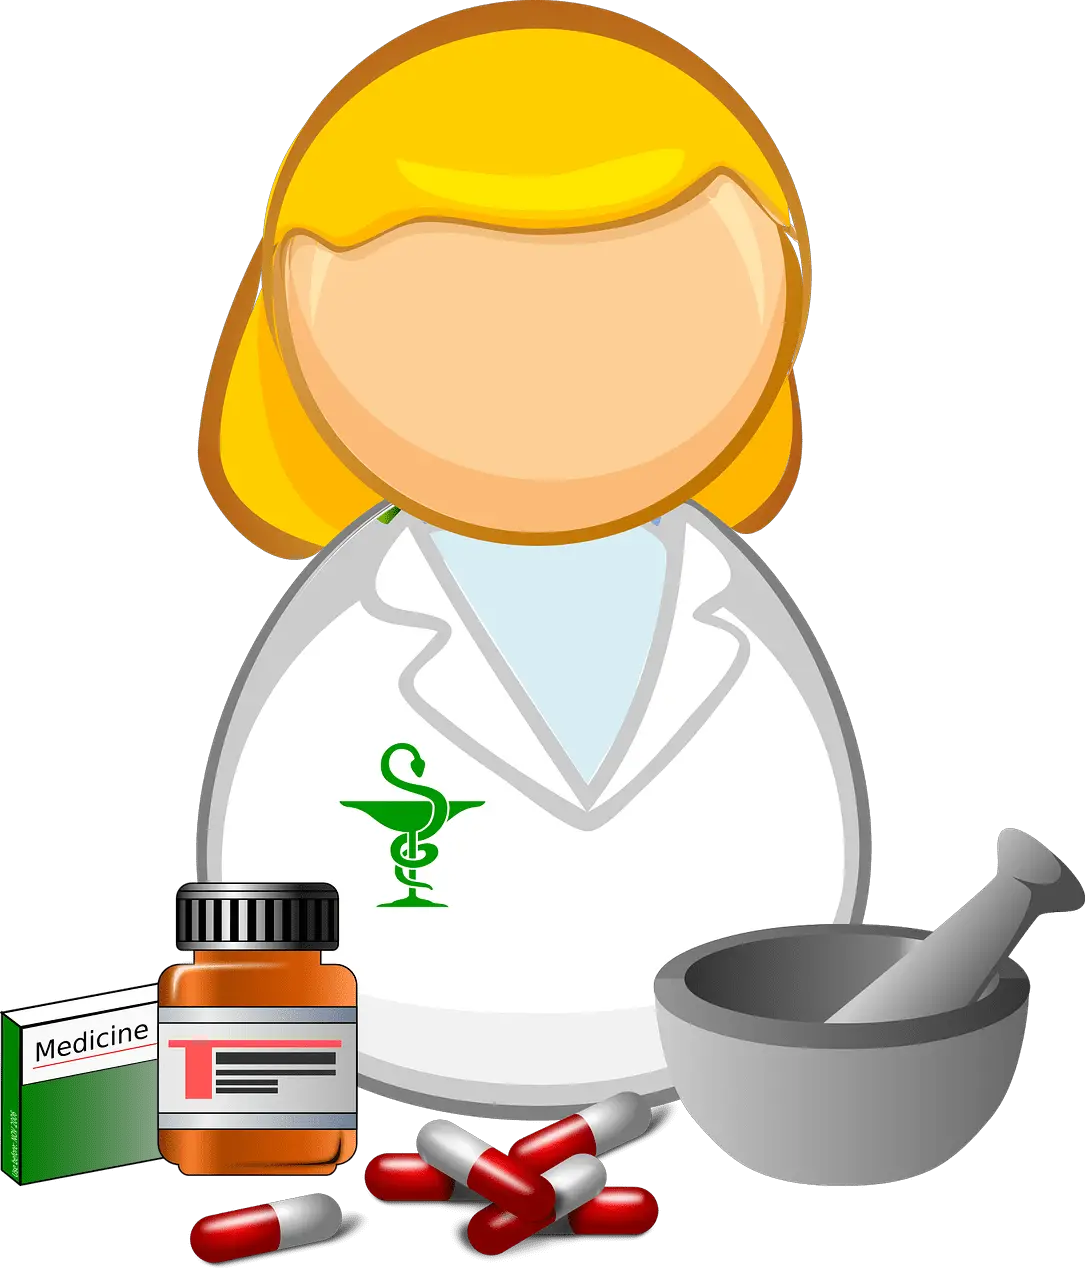 Pharmacist drawing. Lady in a white lab coat